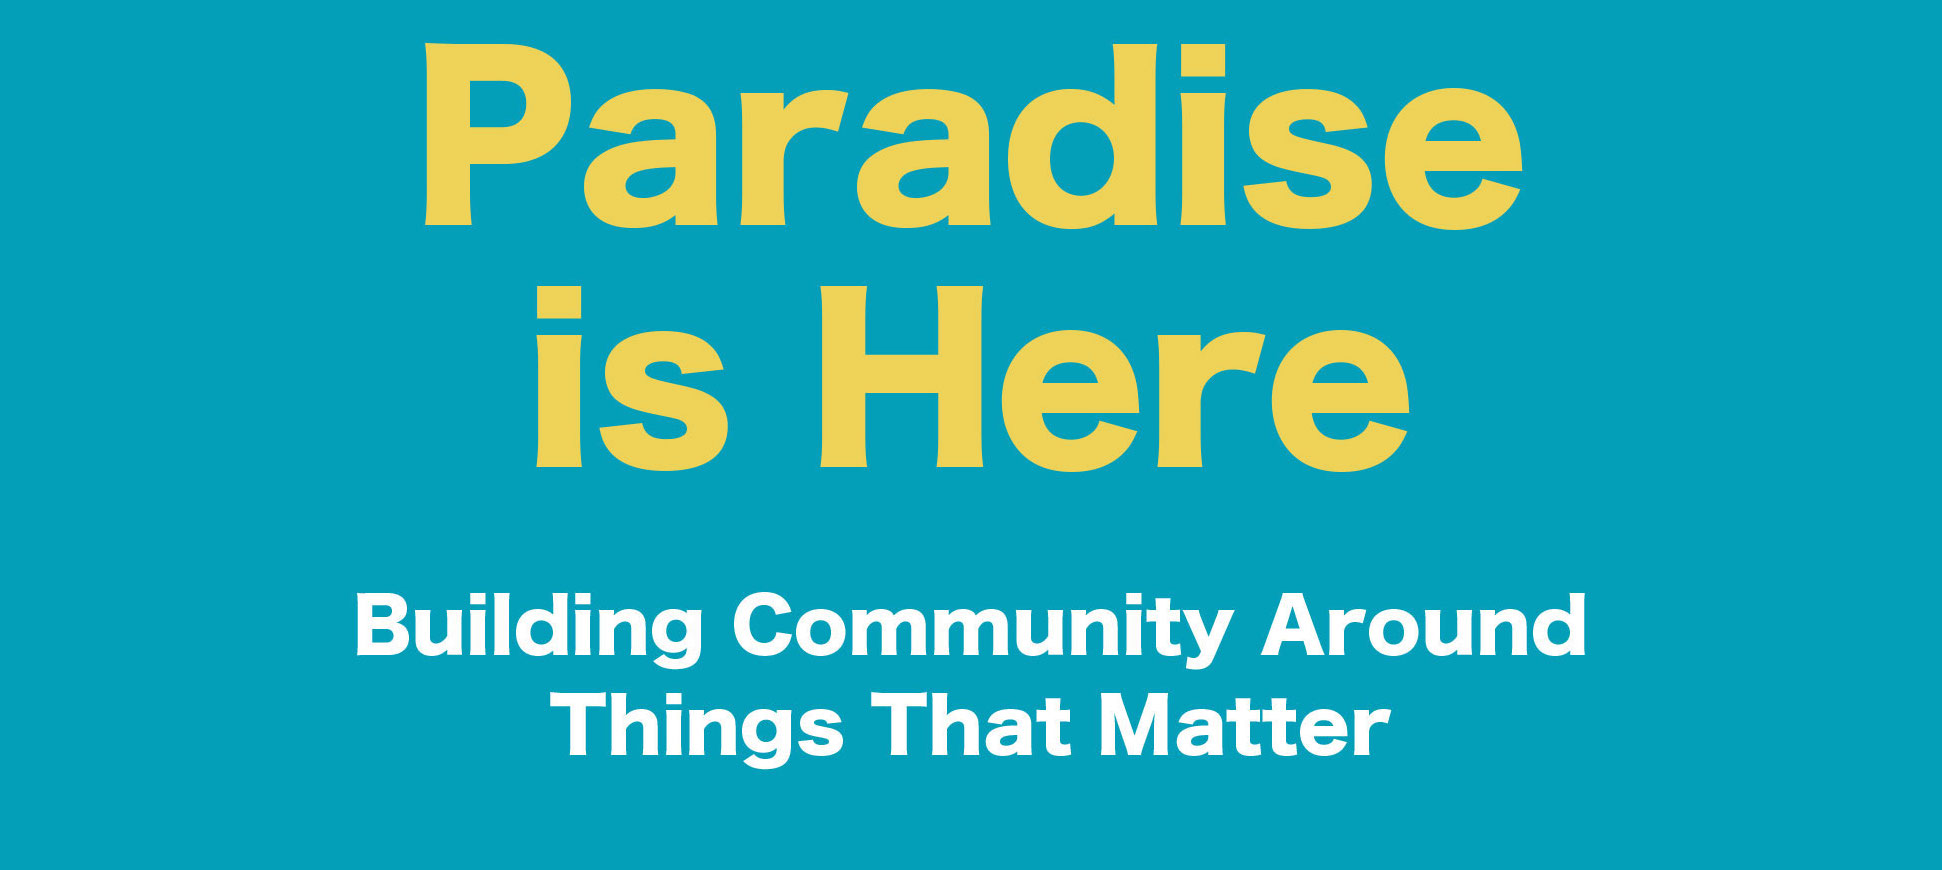 Paradise cover cropped for website banner.jpeg (1)